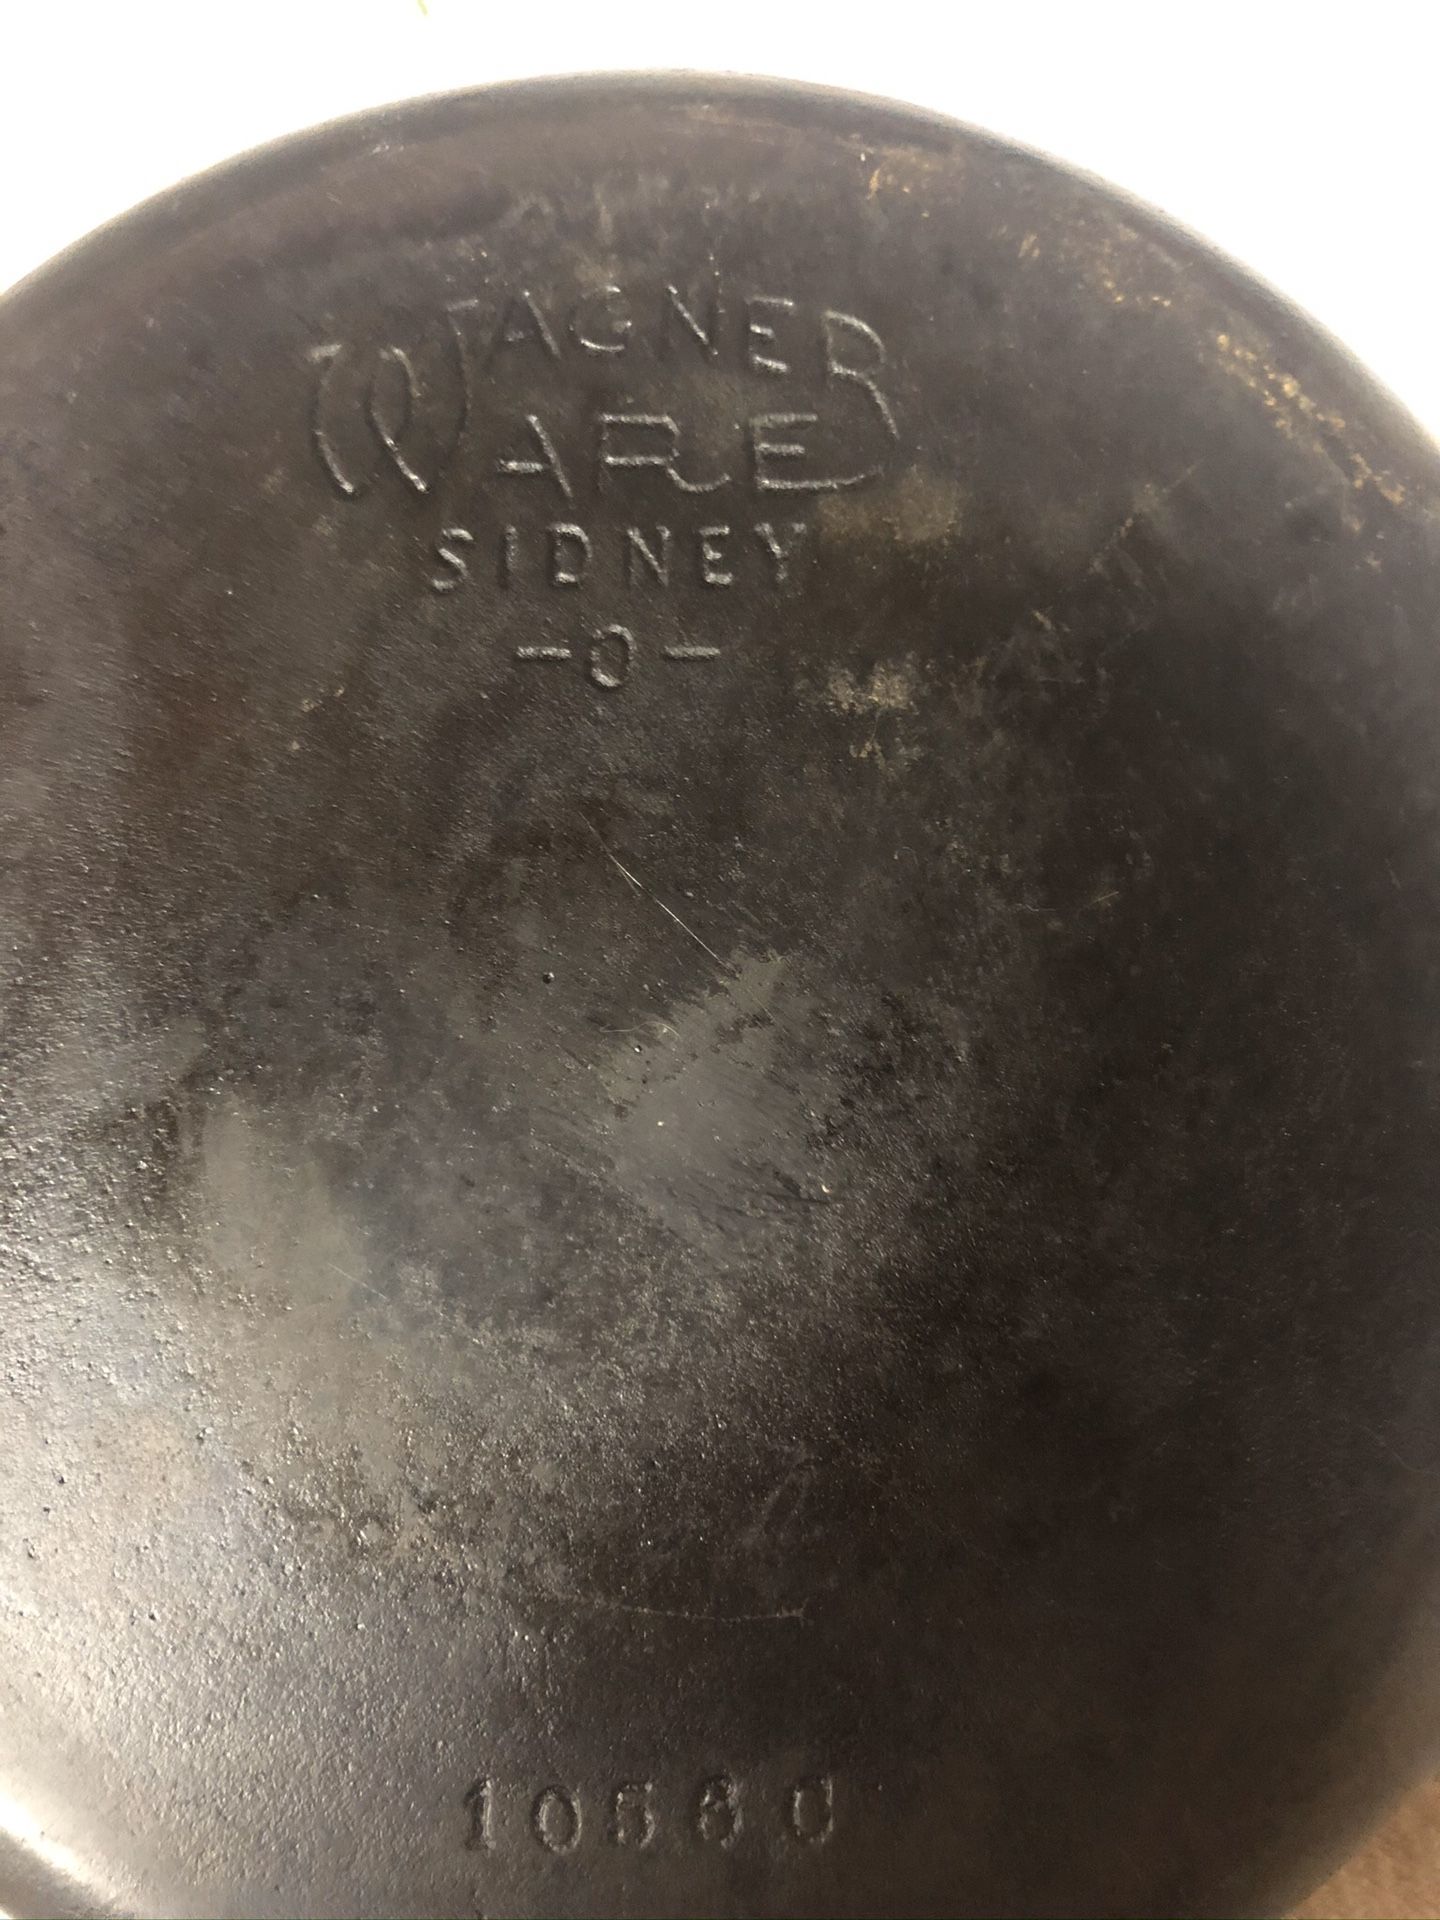 Wagner cast iron frying pan